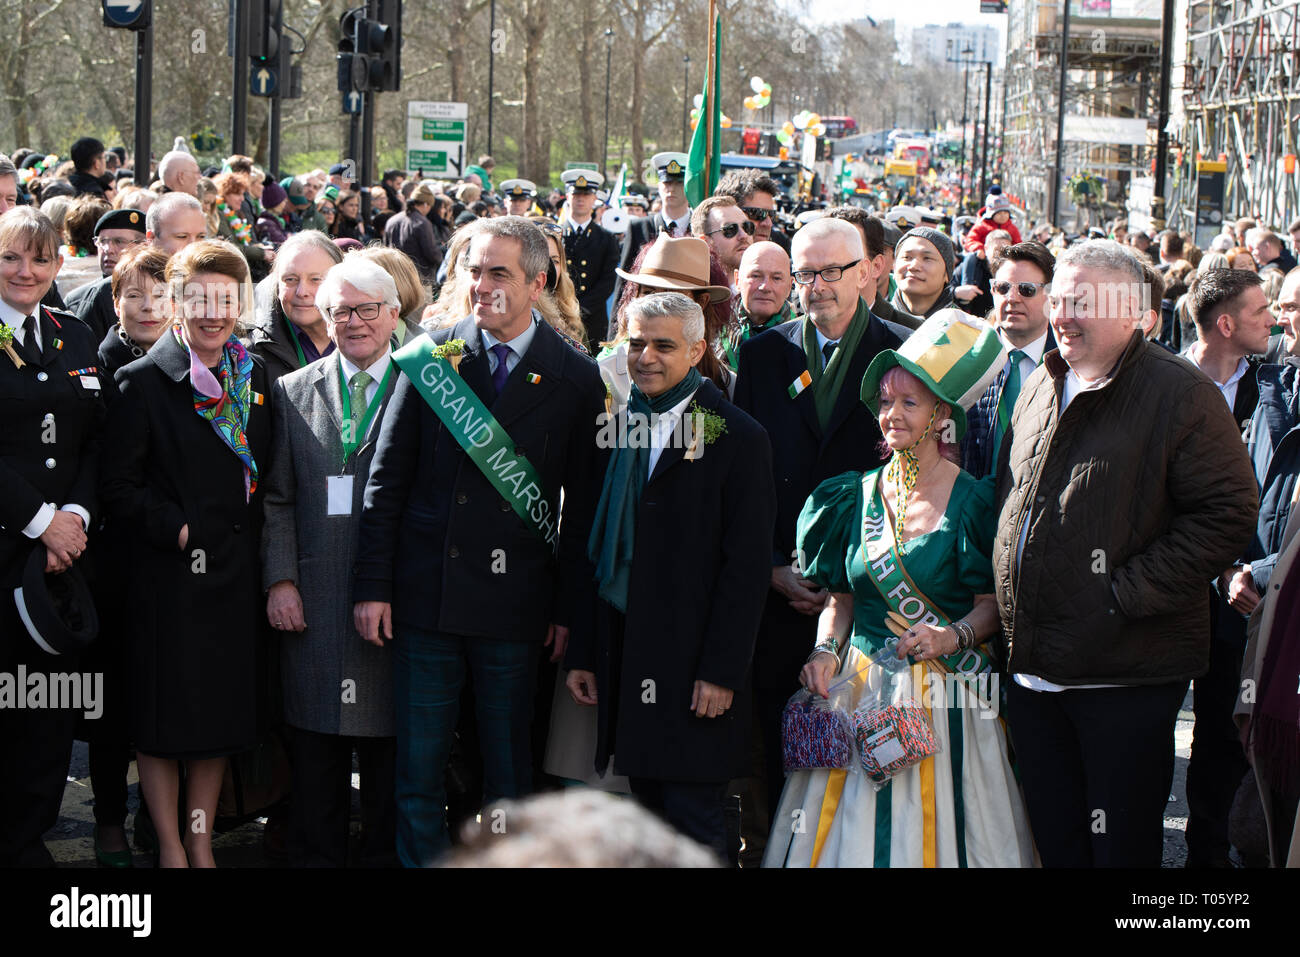 London, UK, 17 March 2019  The London St Patrick's Day Festival, now in its 17th year, attracts more than 125,000 people to events across London and to the parade and festival in central London and Trafalgar Square. This year’s theme is #LondonIsOpen. Leading the parade were London Mayor Sadiq Khan and actor James Nesbitt.  Credit: Ilyas Ayub/ Alamy Live News Stock Photo